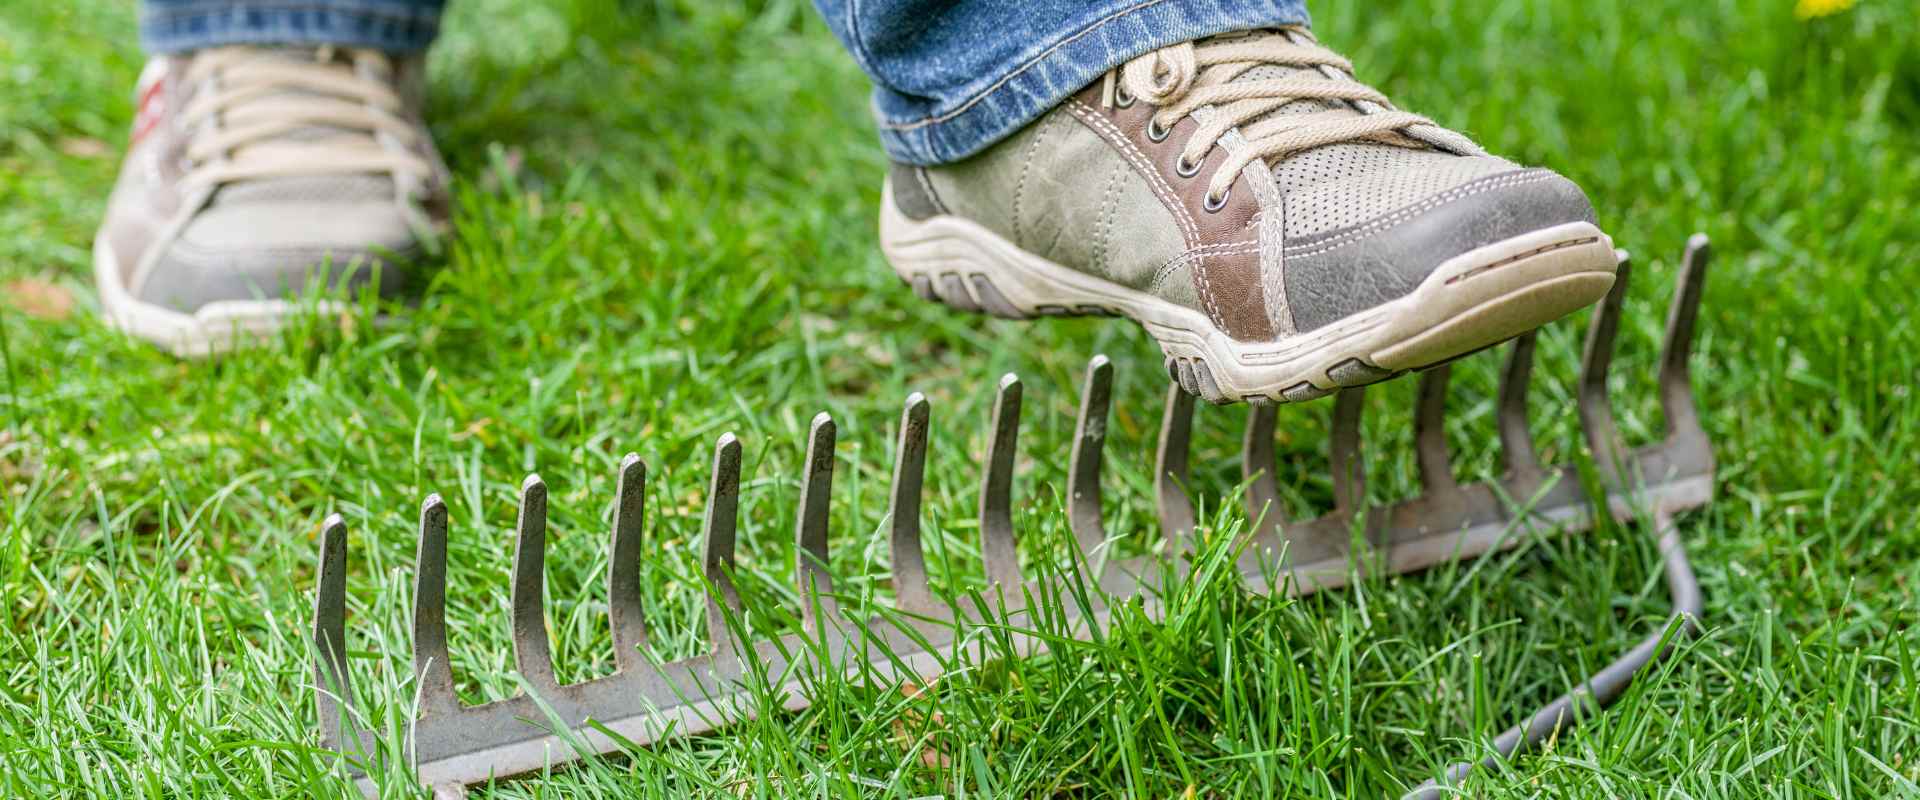 Stepping on Rakes: Personal Accountability